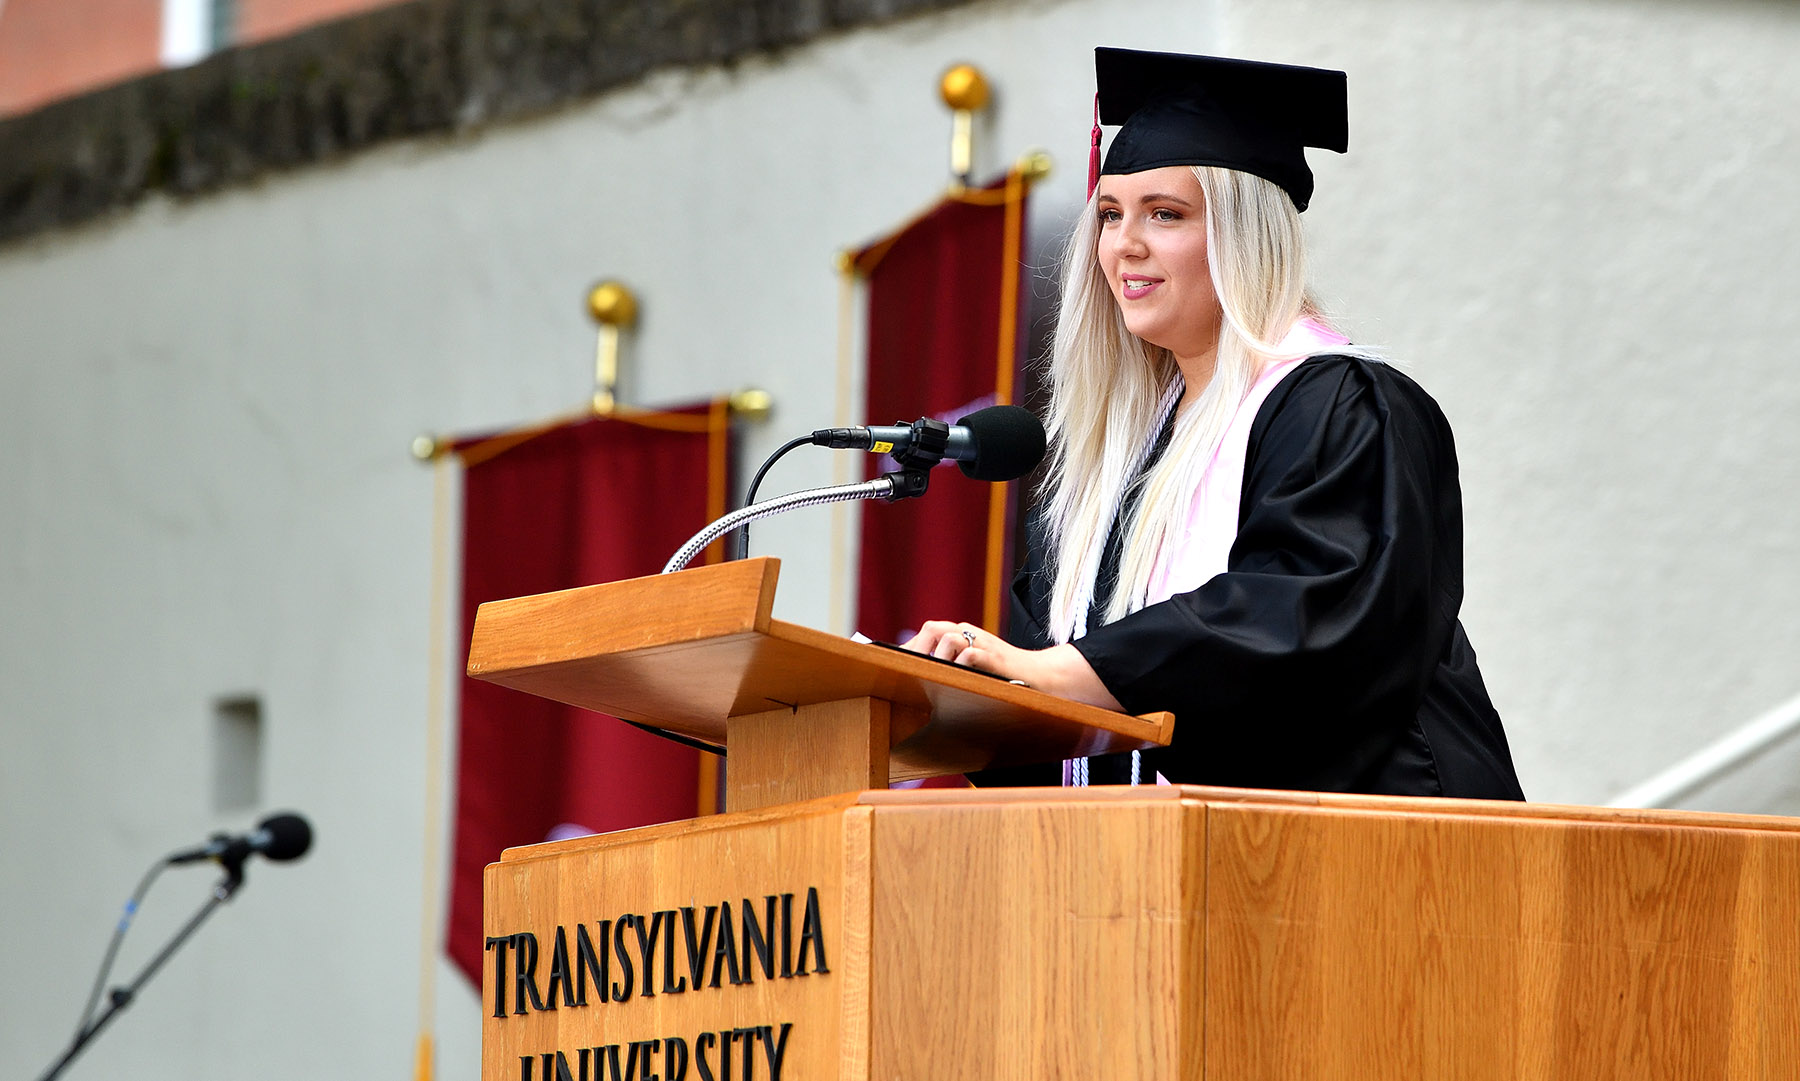 “We did it!” Read the 2019 student commencement speaker’s remarks